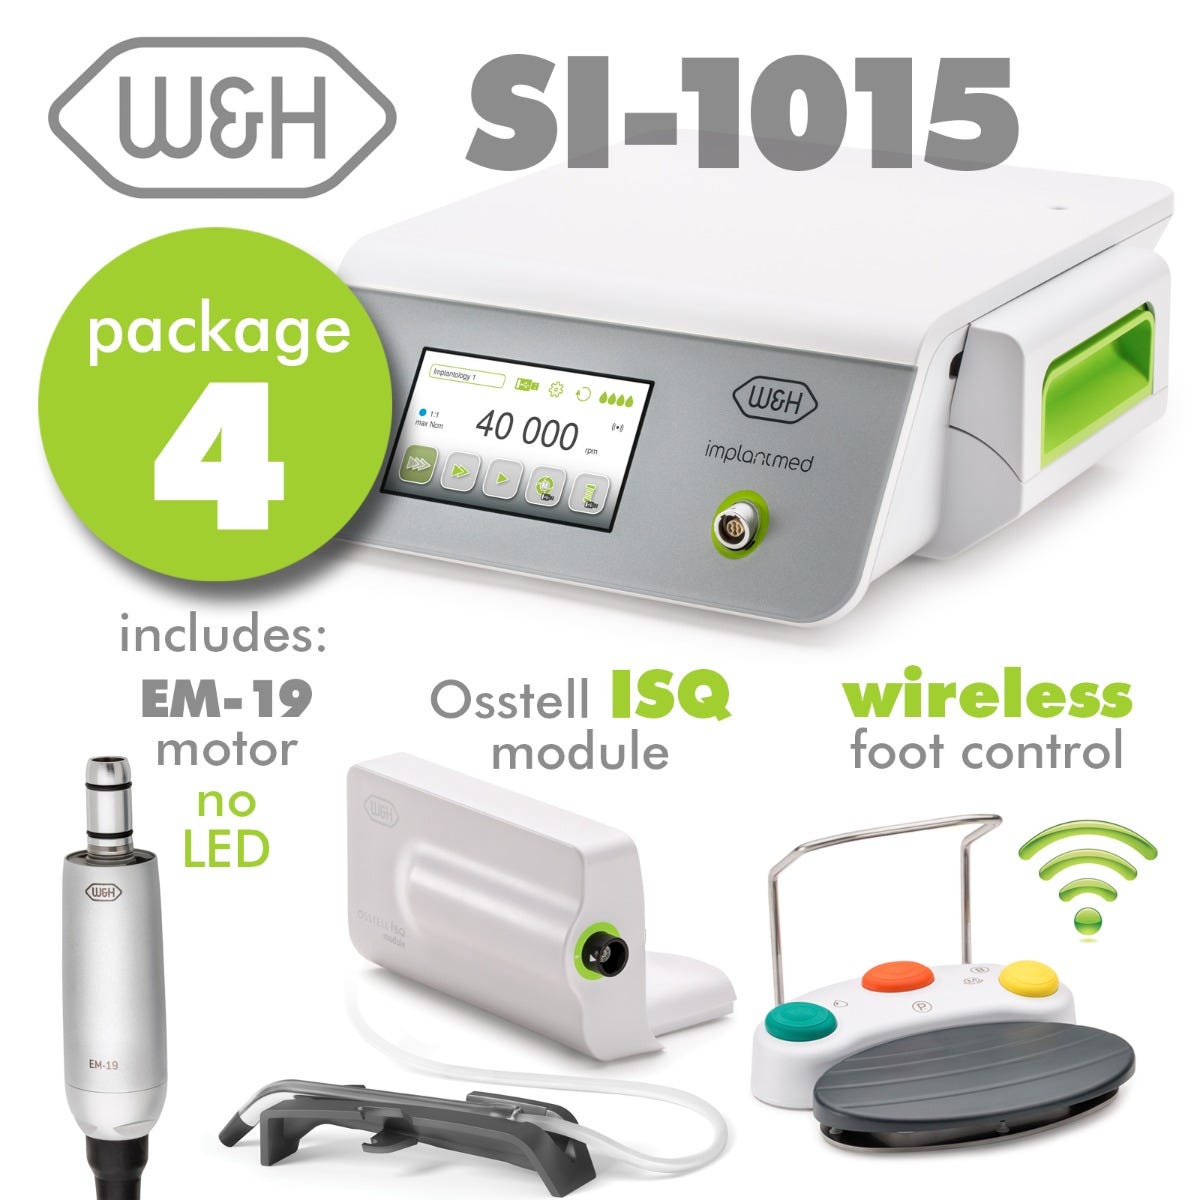 Implantmed Plus Set 4- Includes: SI-1015 Control Unit , EM-19 Motor, Wifi Wireless Foot Control, Osstell Module